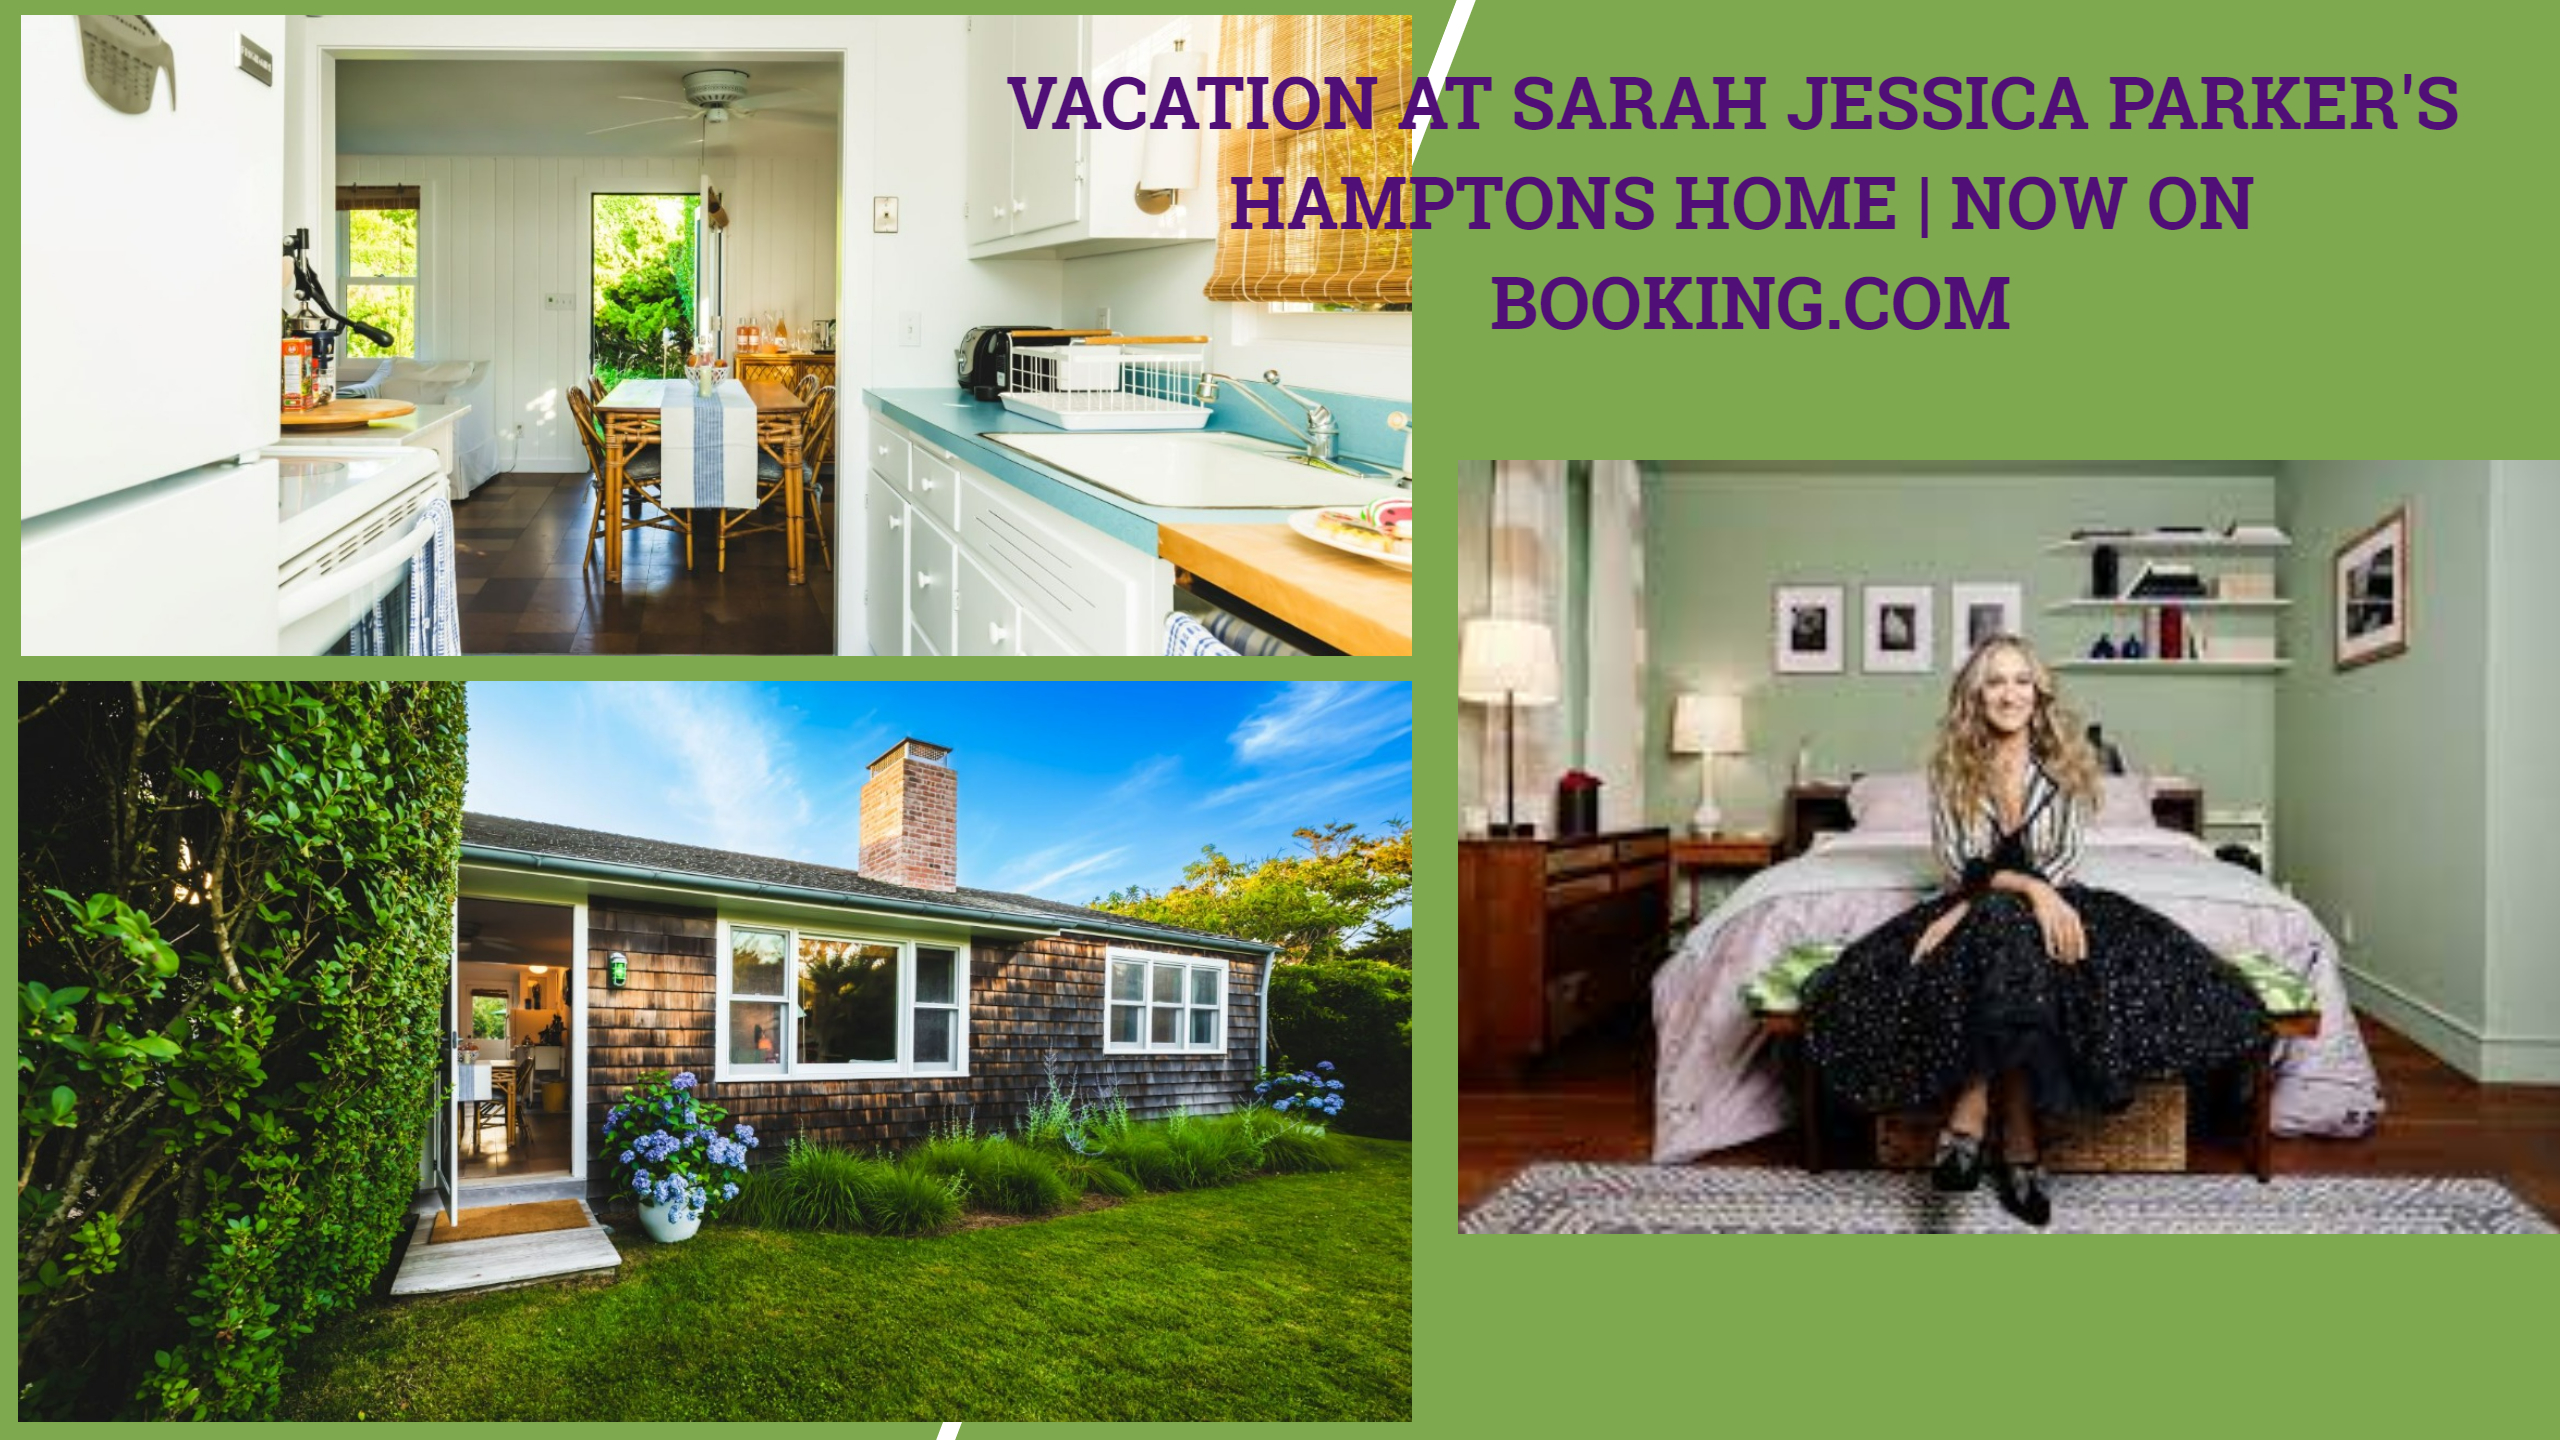 Vacation at Sarah Jessica Parker’s Hamptons Home  | Booking Opens on August 23, 2022 at 9:30am IST only on Booking.com